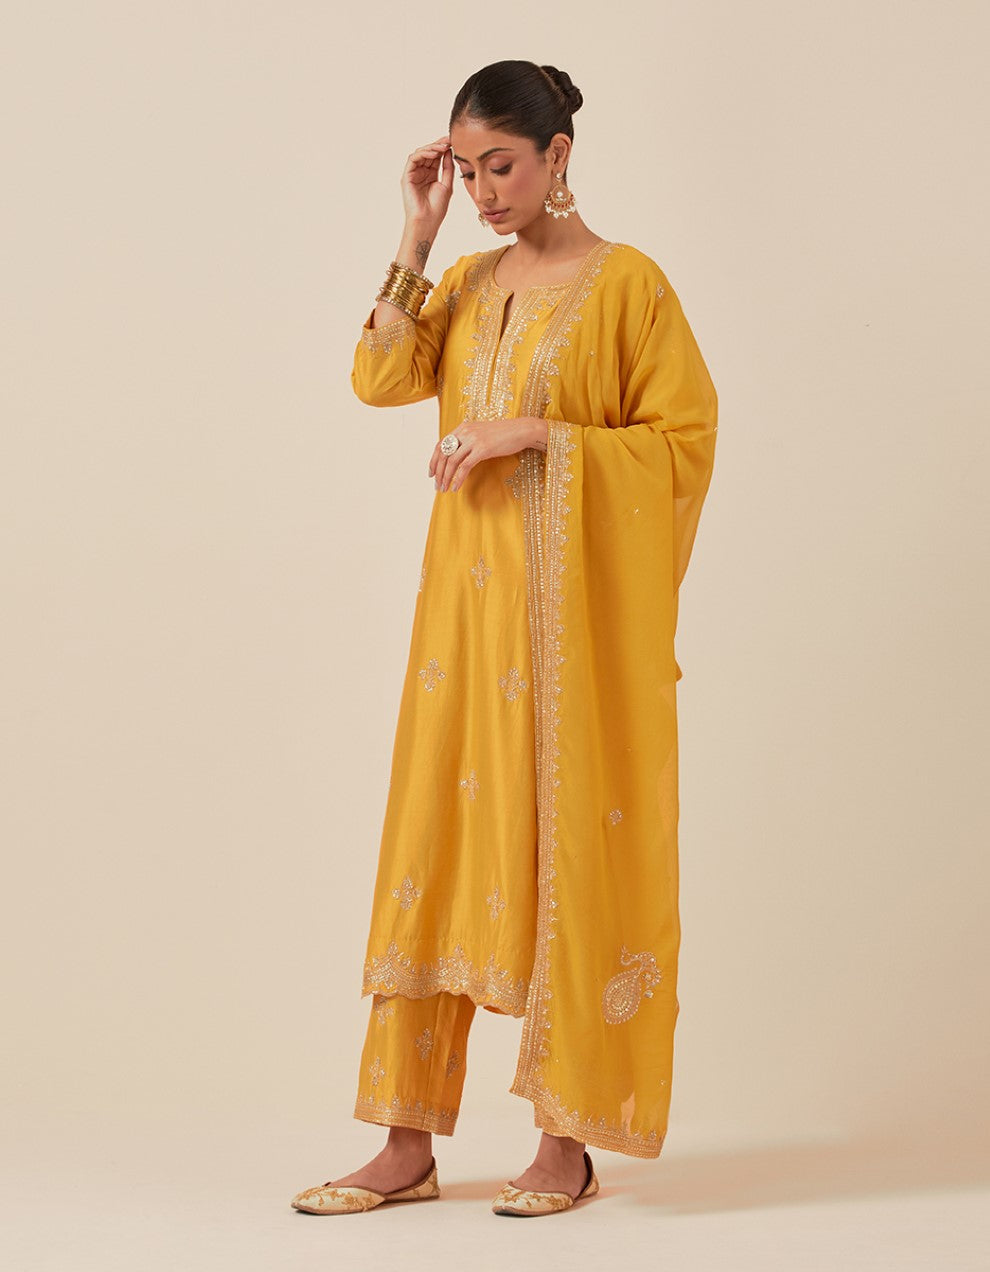 Yellow hand embroidered kurta with pants and dupatta